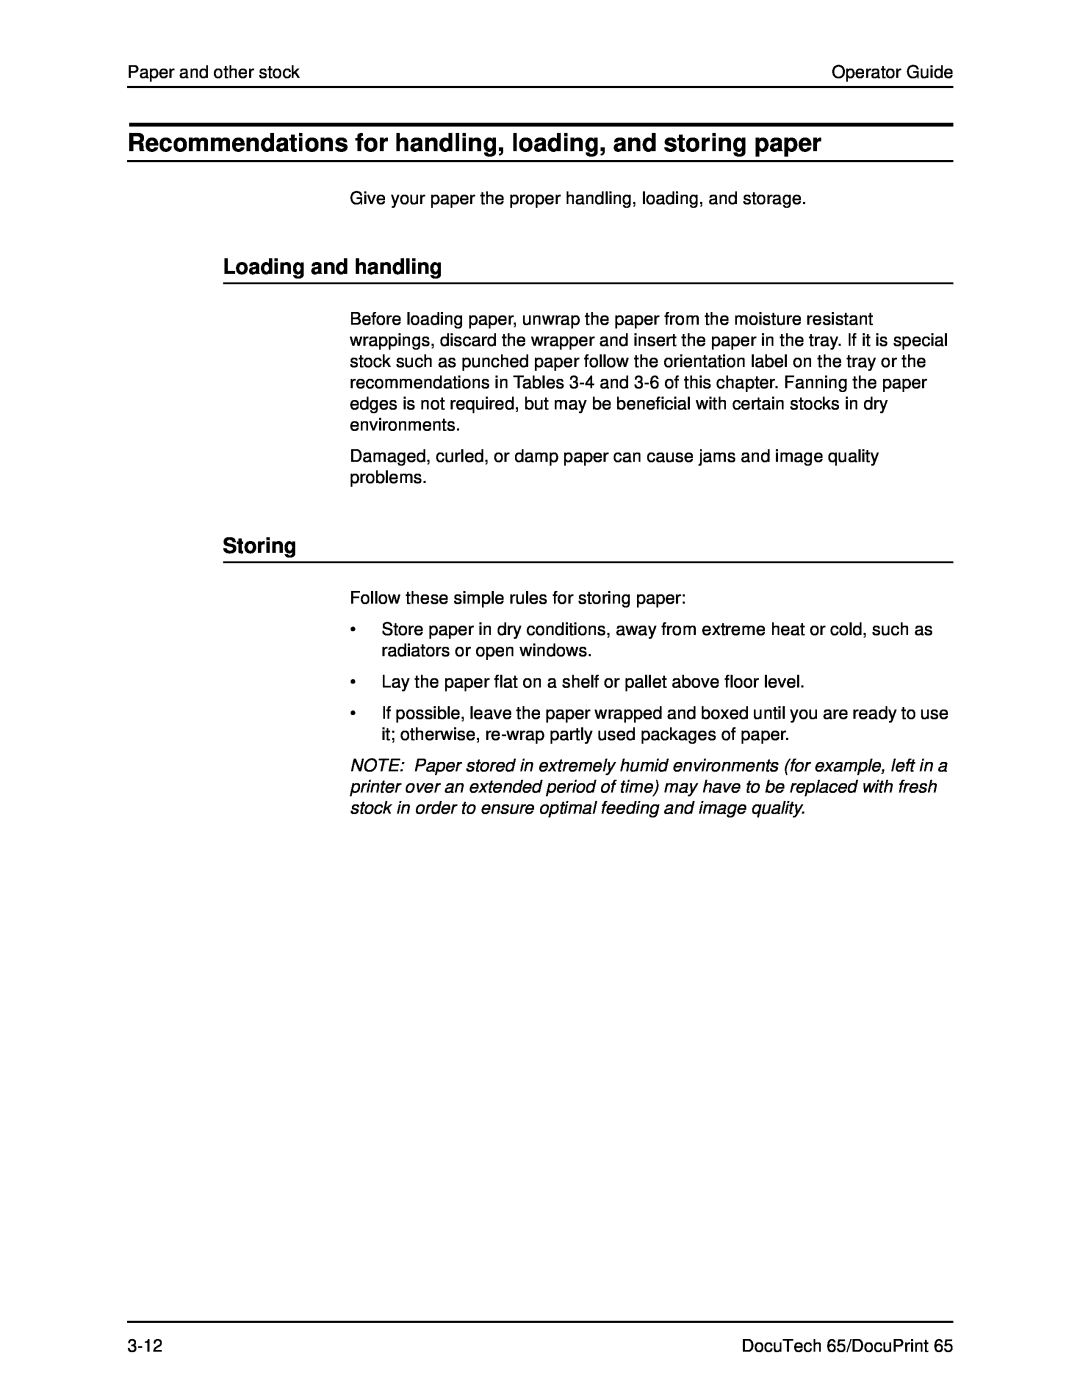 Xerox DOCUTECH 65 manual Recommendations for handling, loading, and storing paper, Loading and handling, Storing 